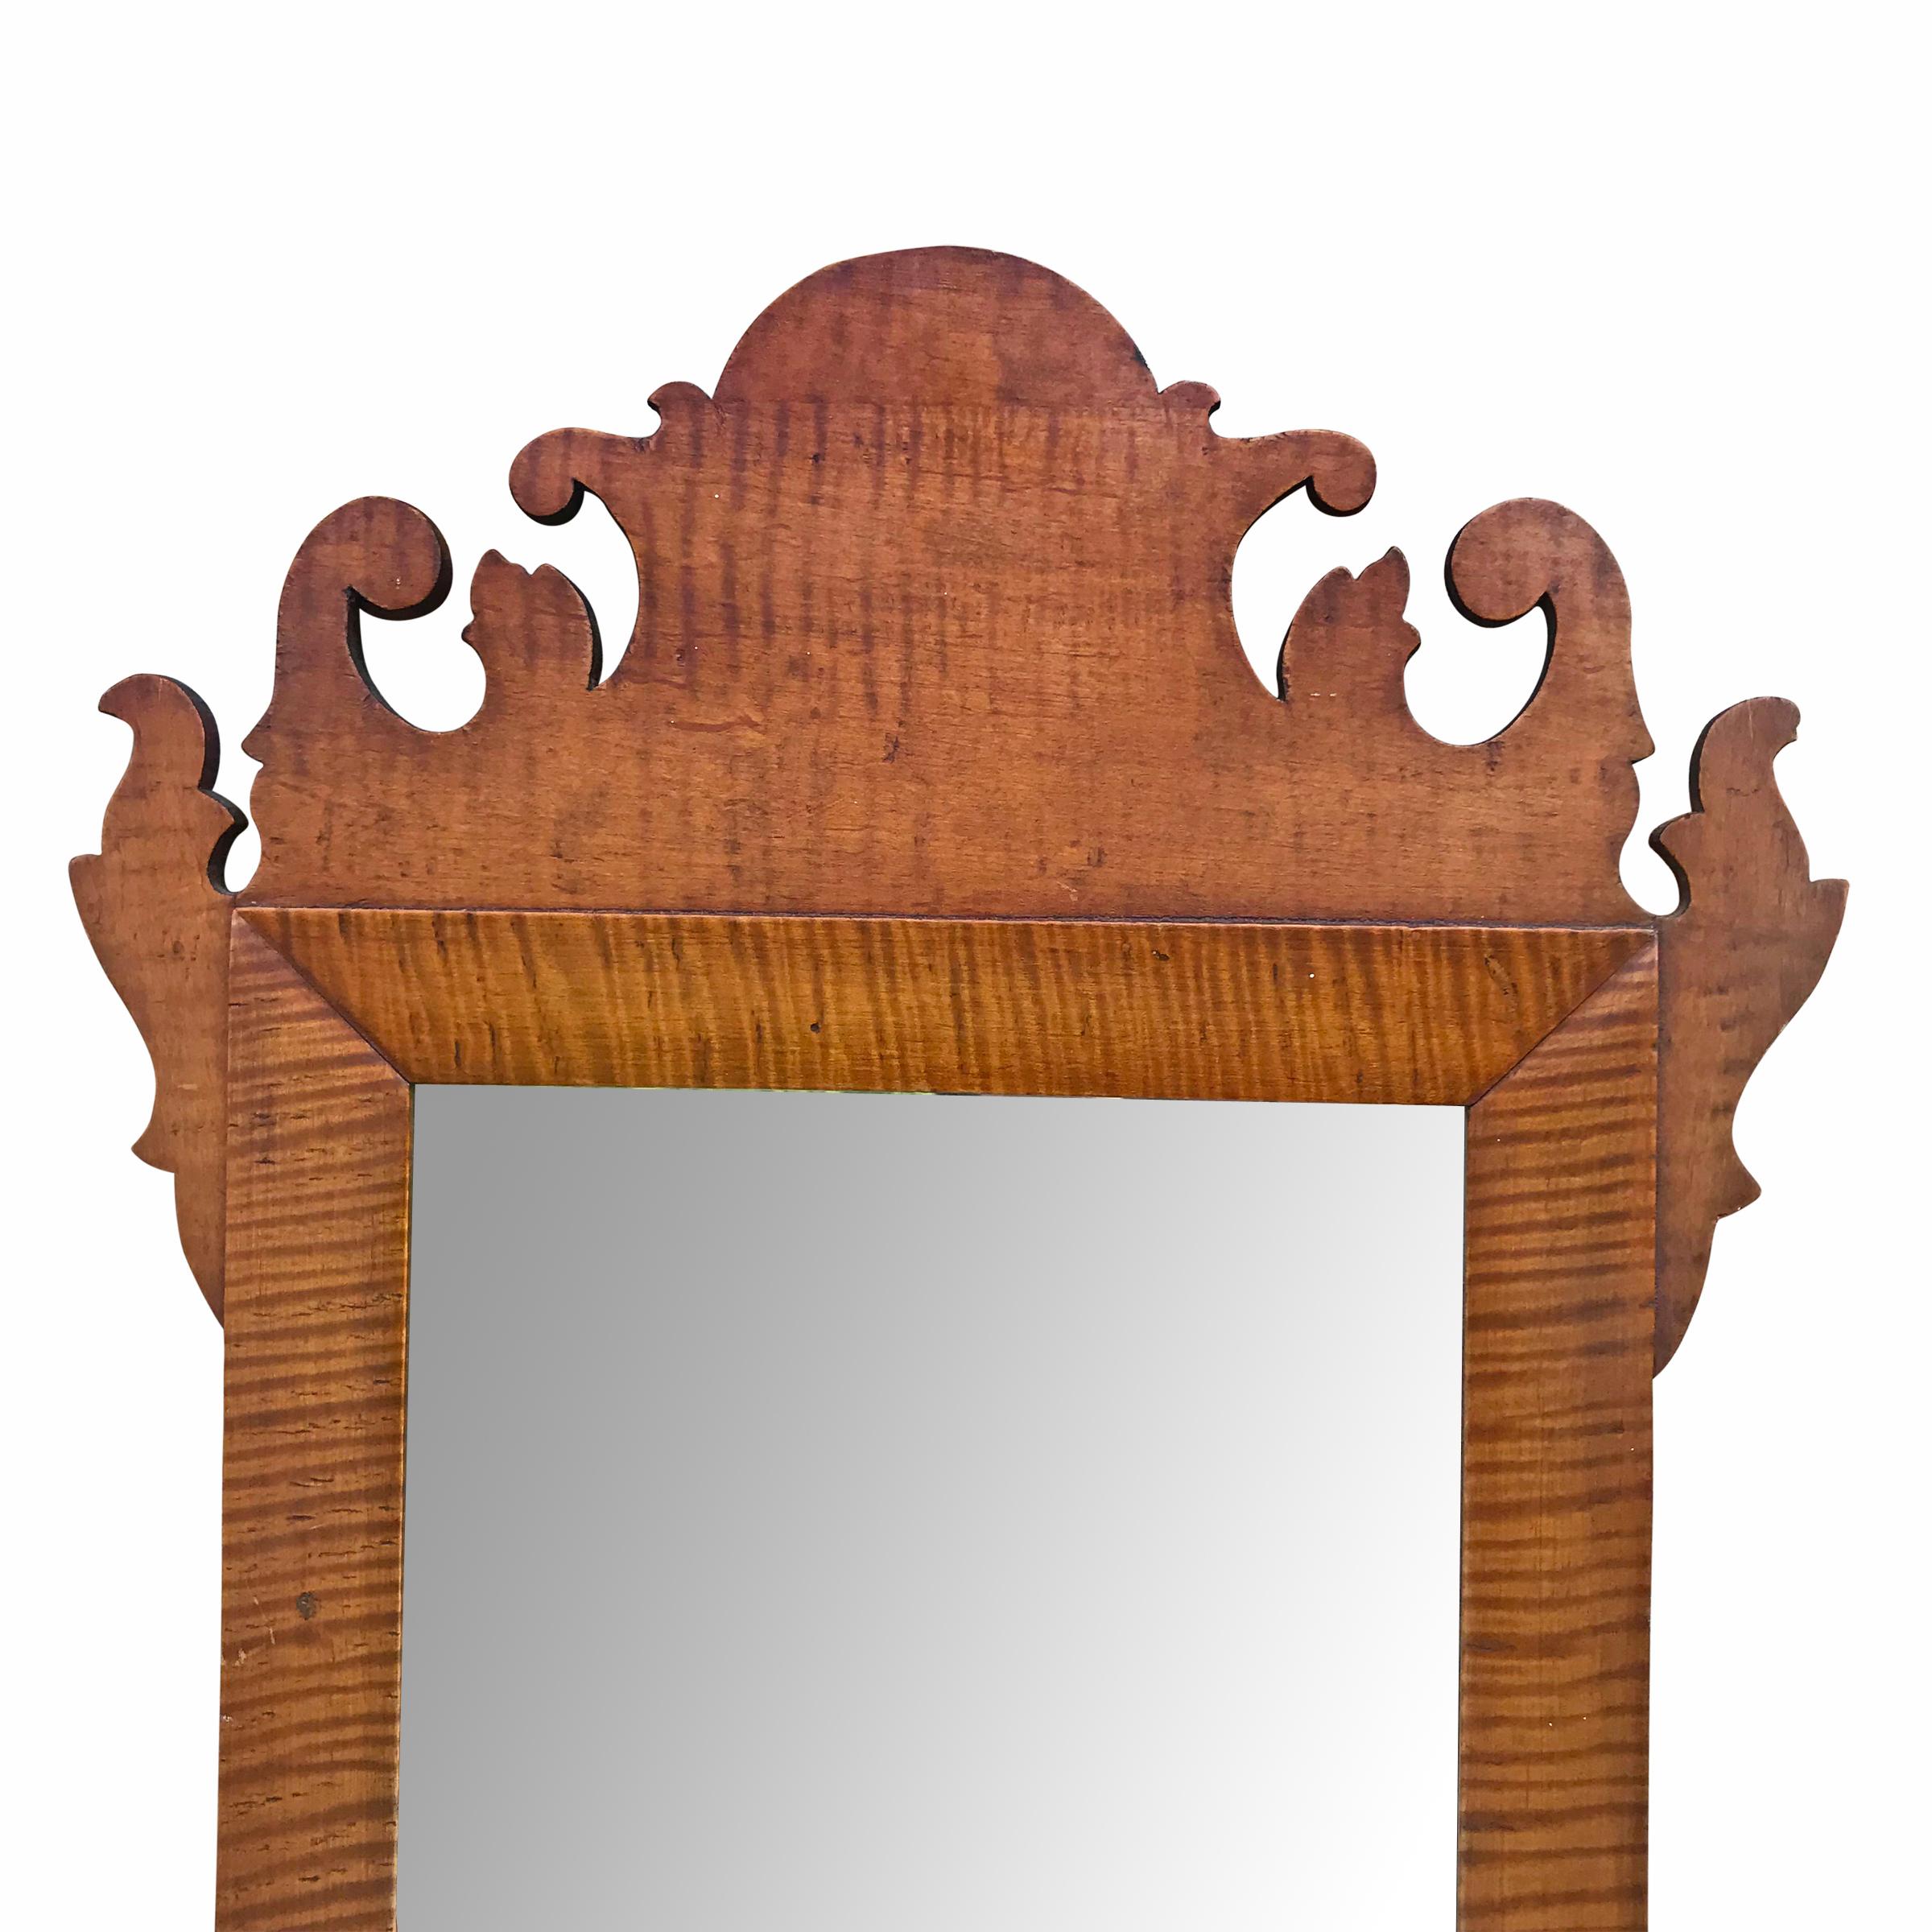 18th century American Chippendale curly or tiger maple framed mirror with wonderfully scrolled carvings.